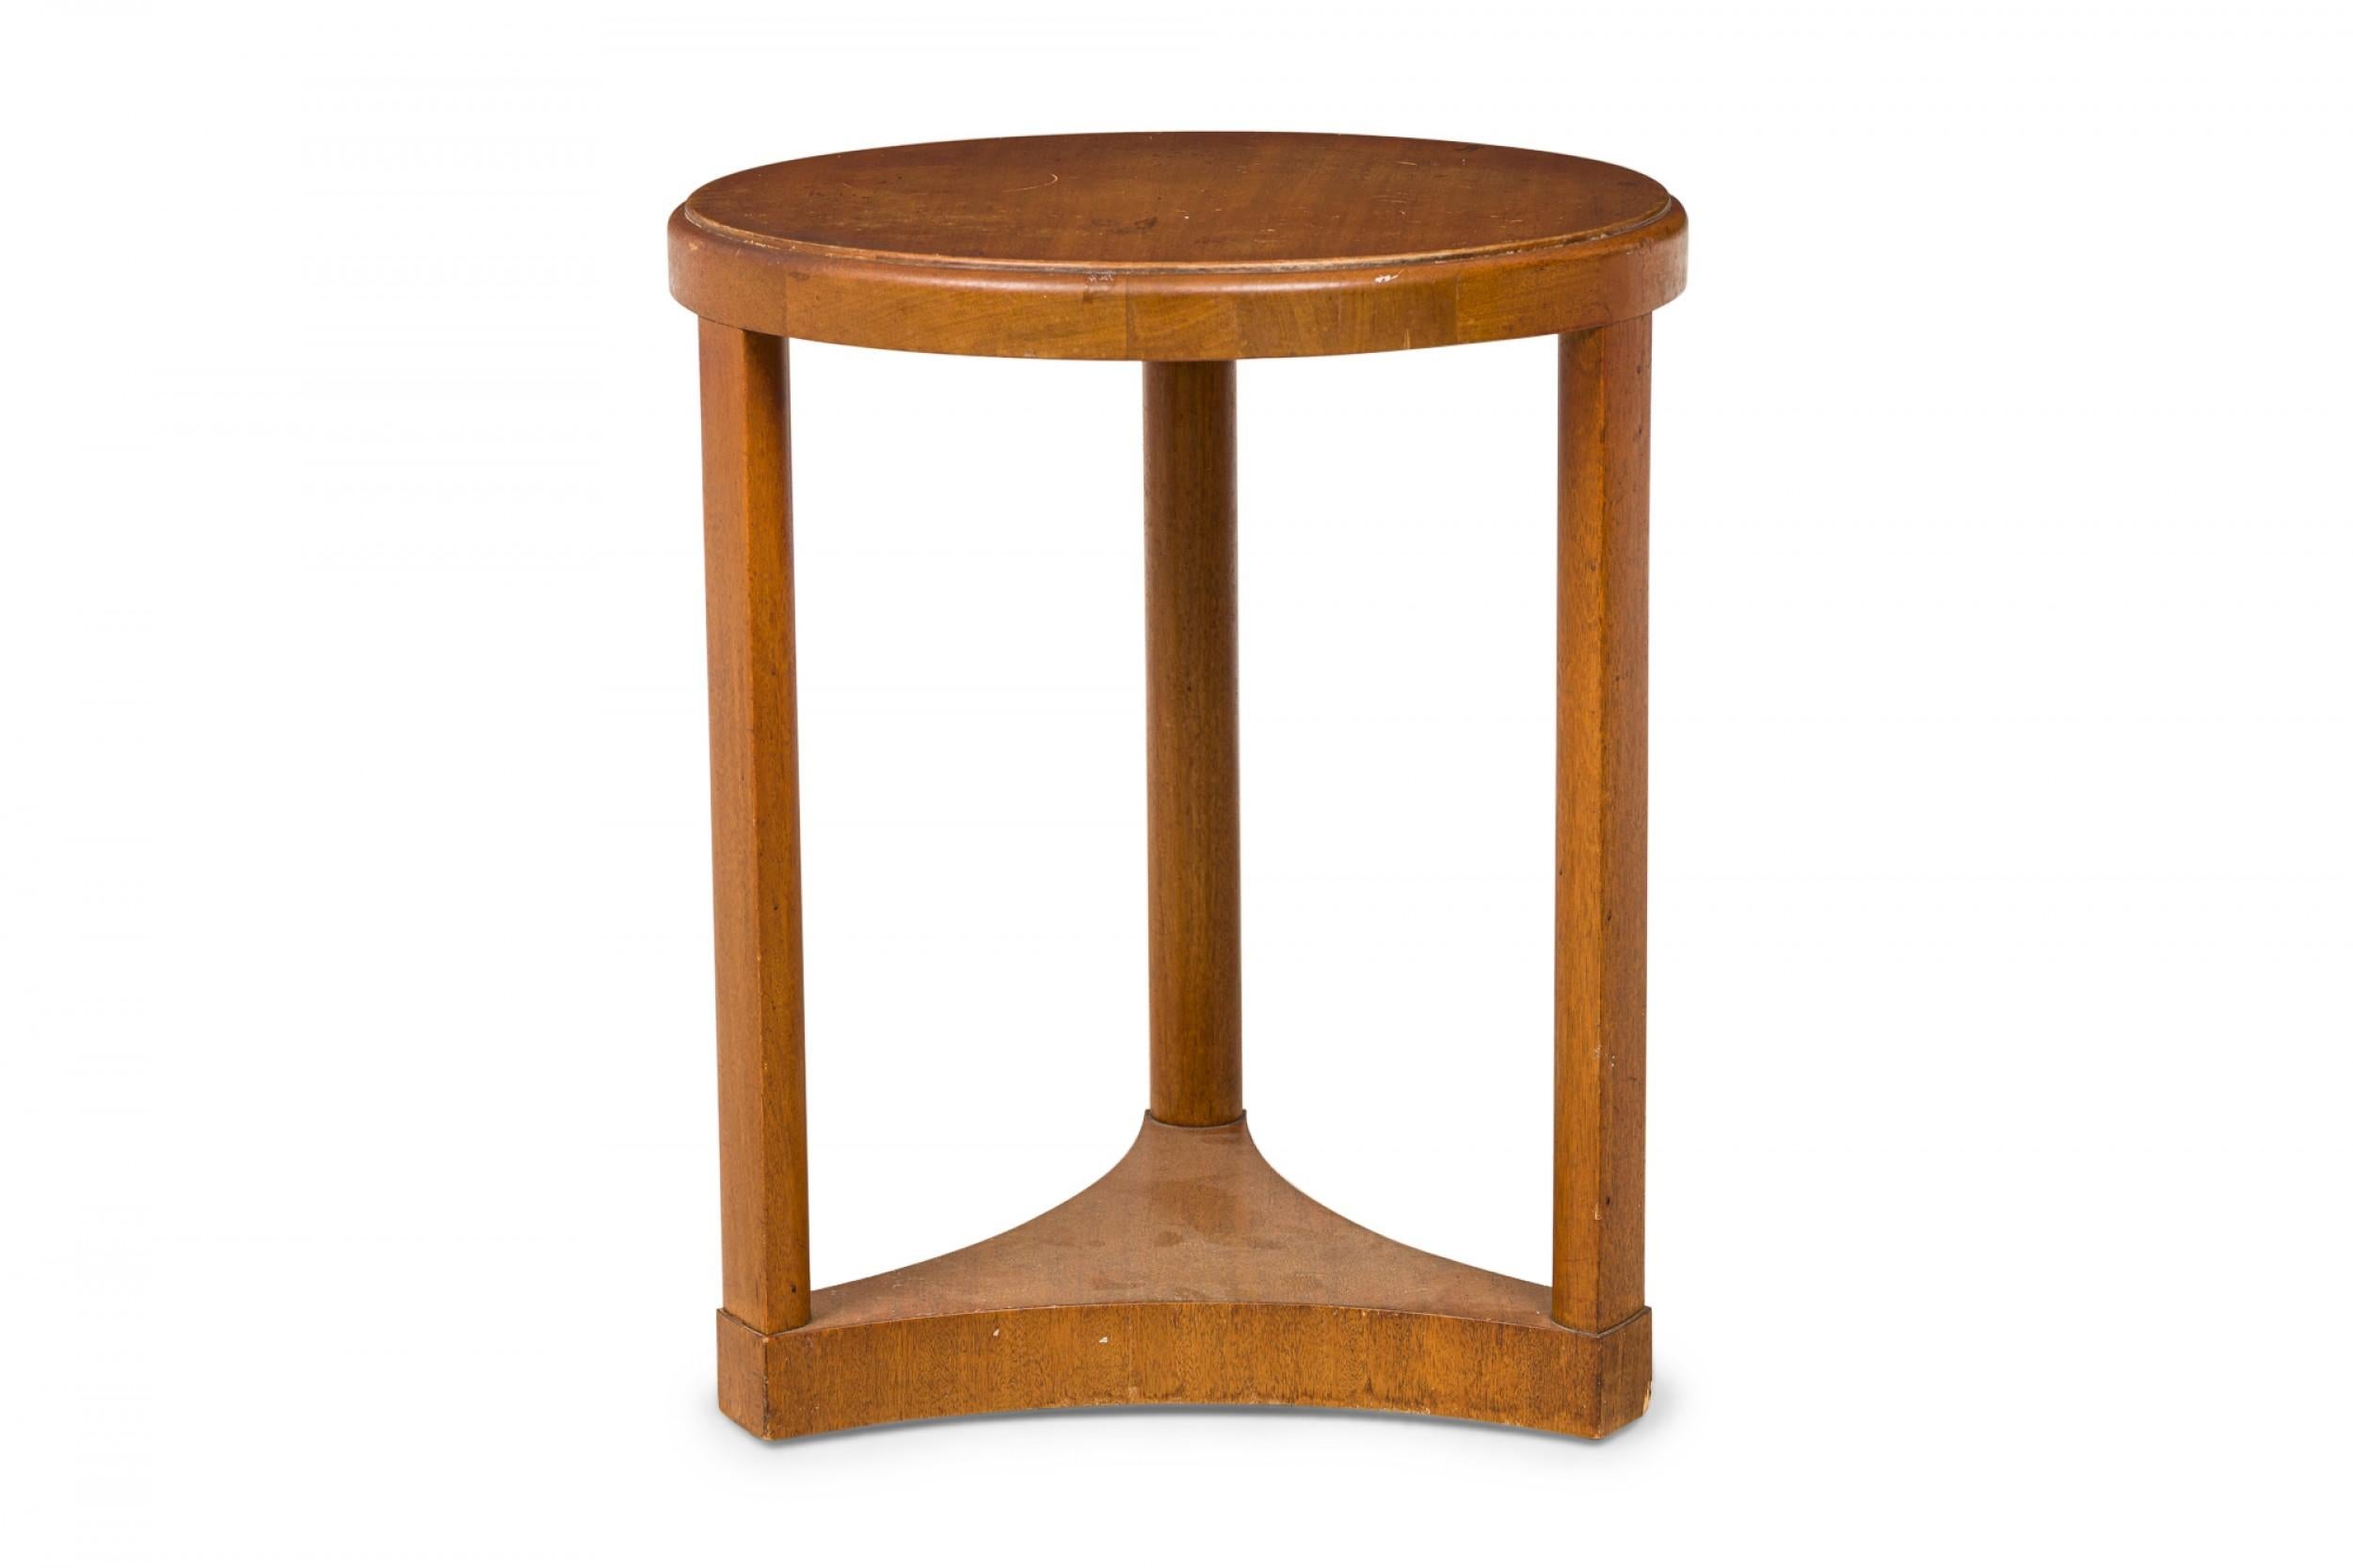 American Mid-Century round wooden side / end table with a circular top with beveled edge resting on three vertical rectangular supports connected to a triangular scooped side base. (EDWARD WORMLEY)(Similar shorter table: DUF0638)
